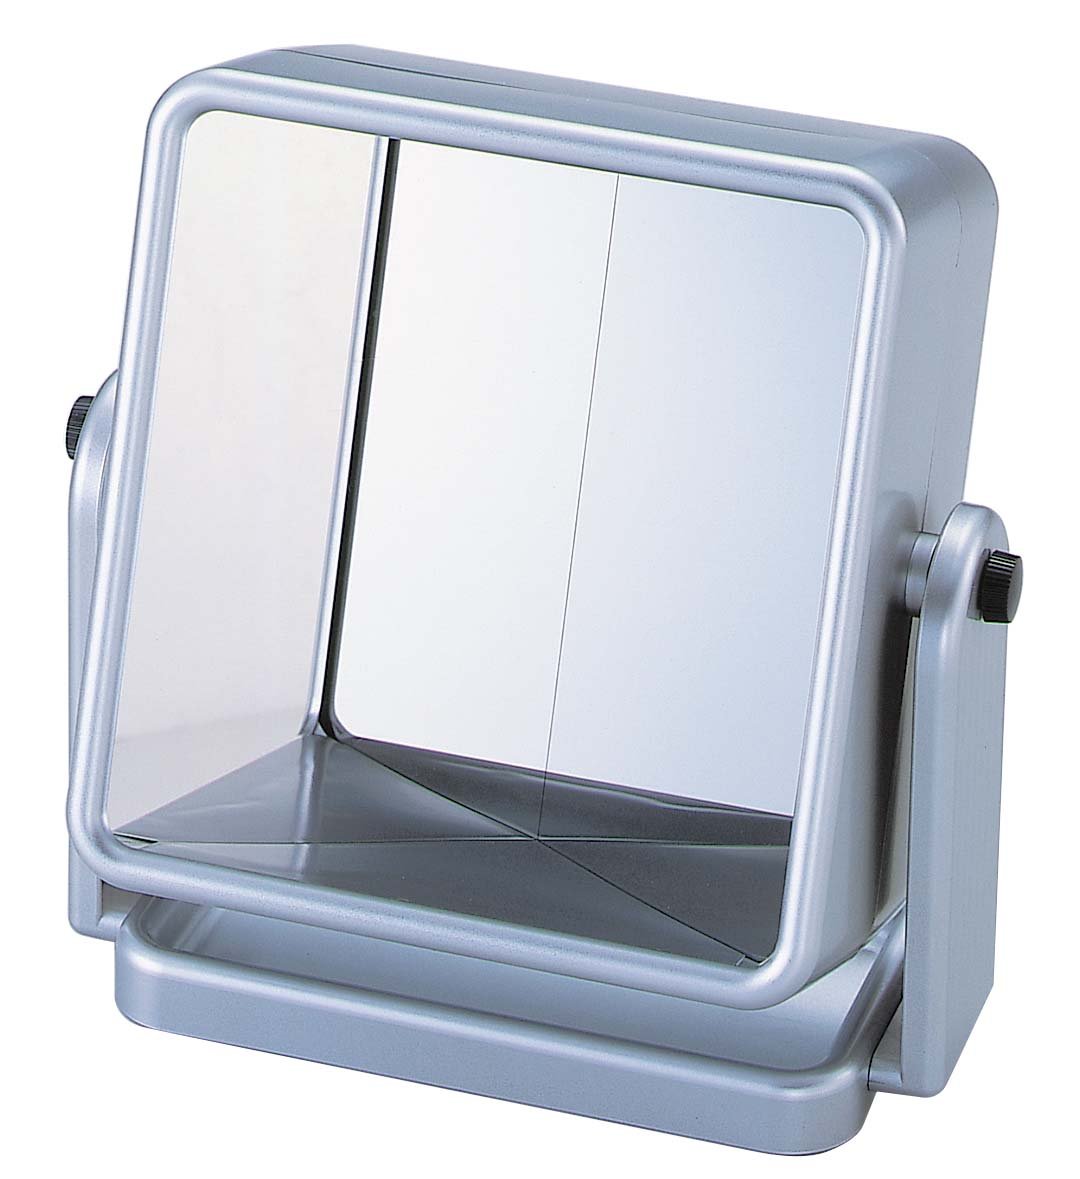 Stand mirror reversal mirror Yamamura tabletop mirror breakthrough! Mirror mirror-reversed YRV-005 that I seen from others can be seen